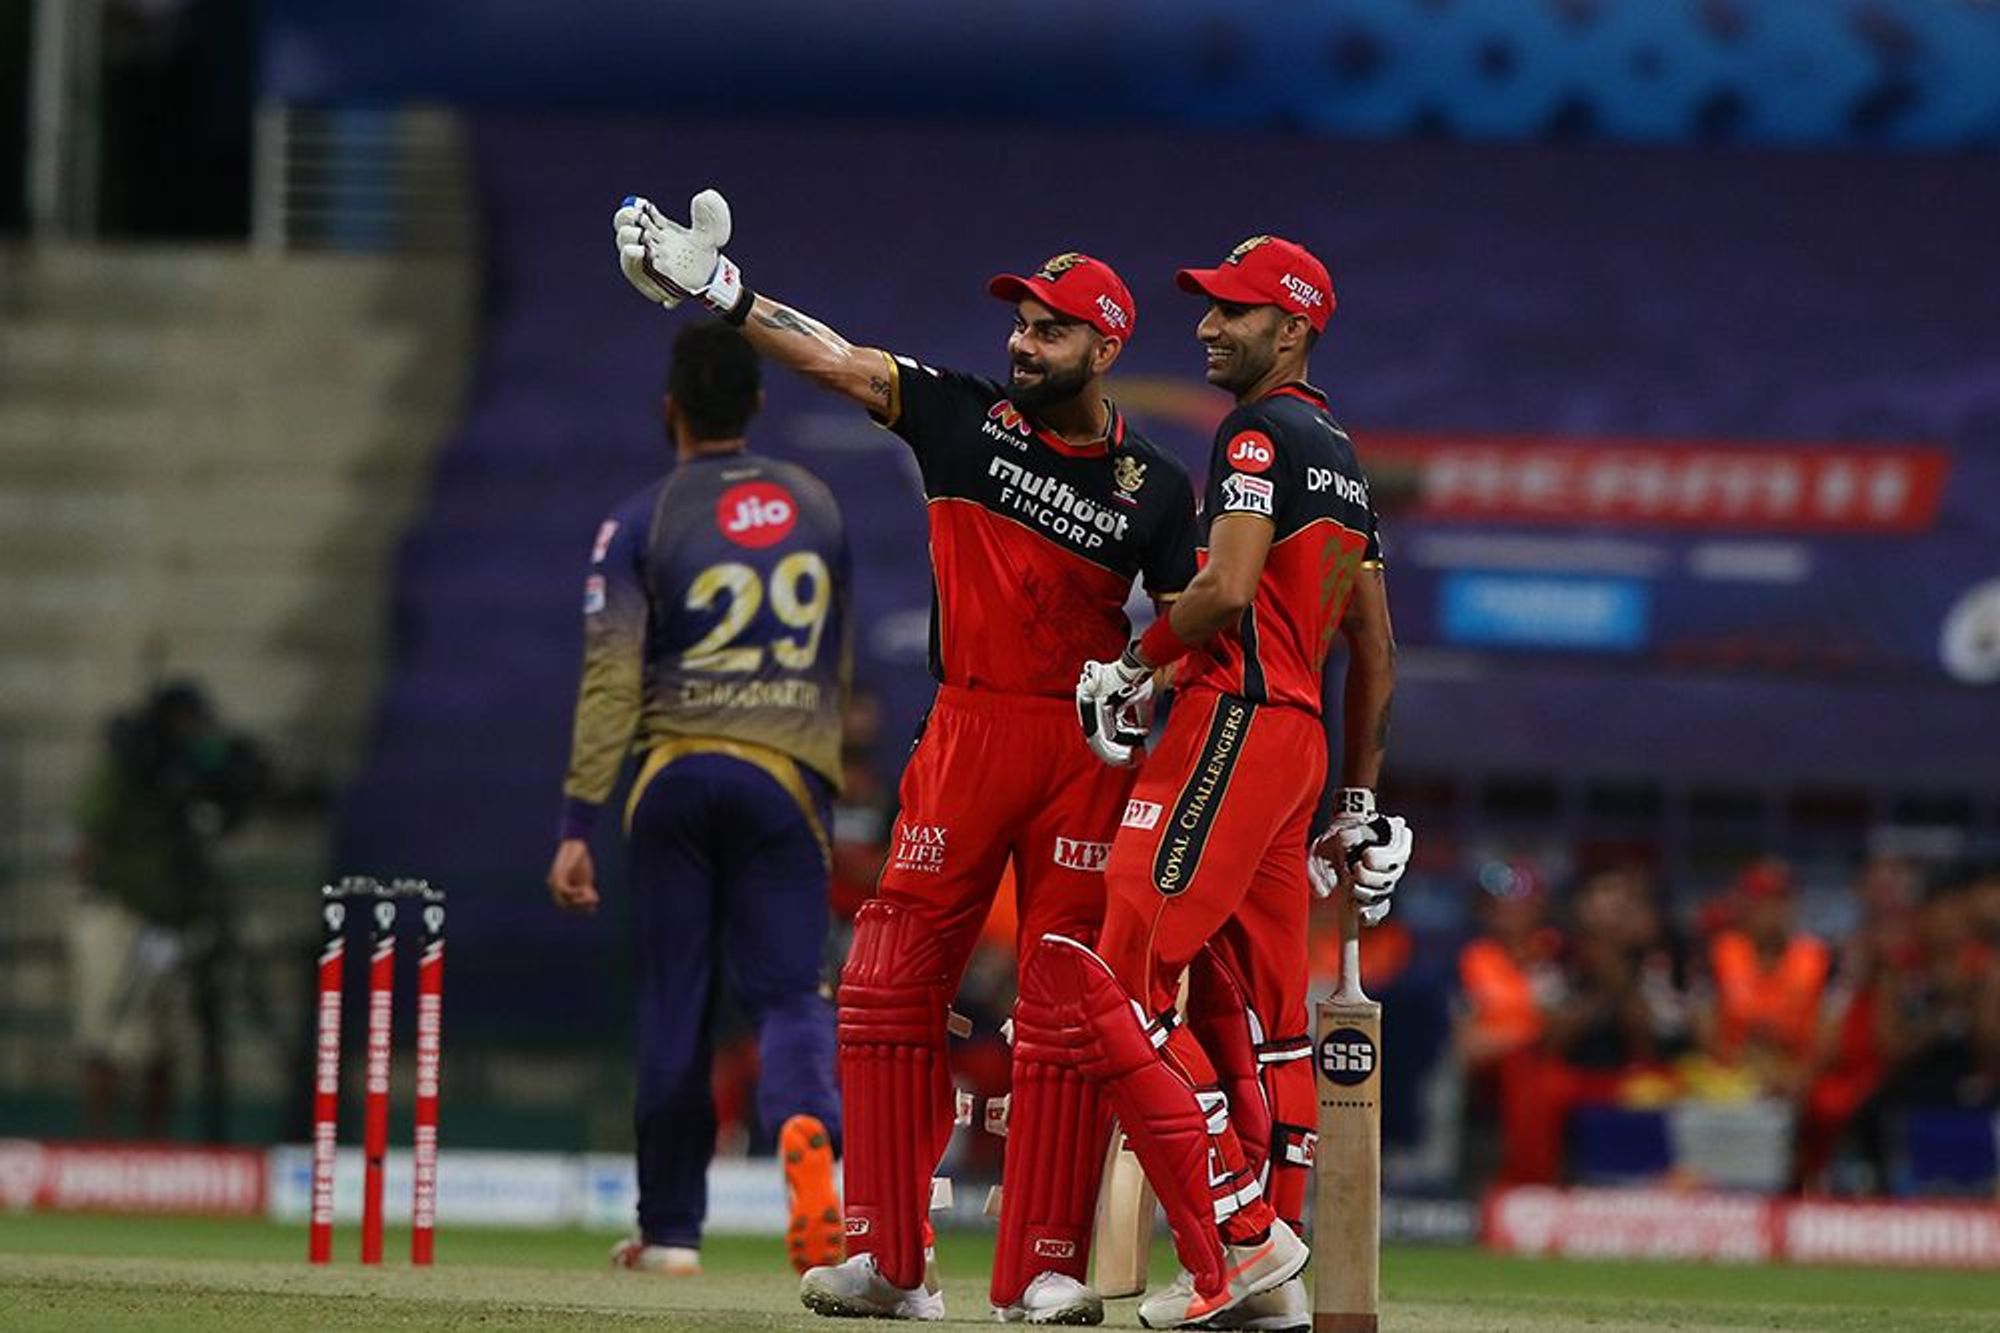 Kohli and Gurkeerat ensured RCB won with 8 wickets in hand | BCCI/IPL